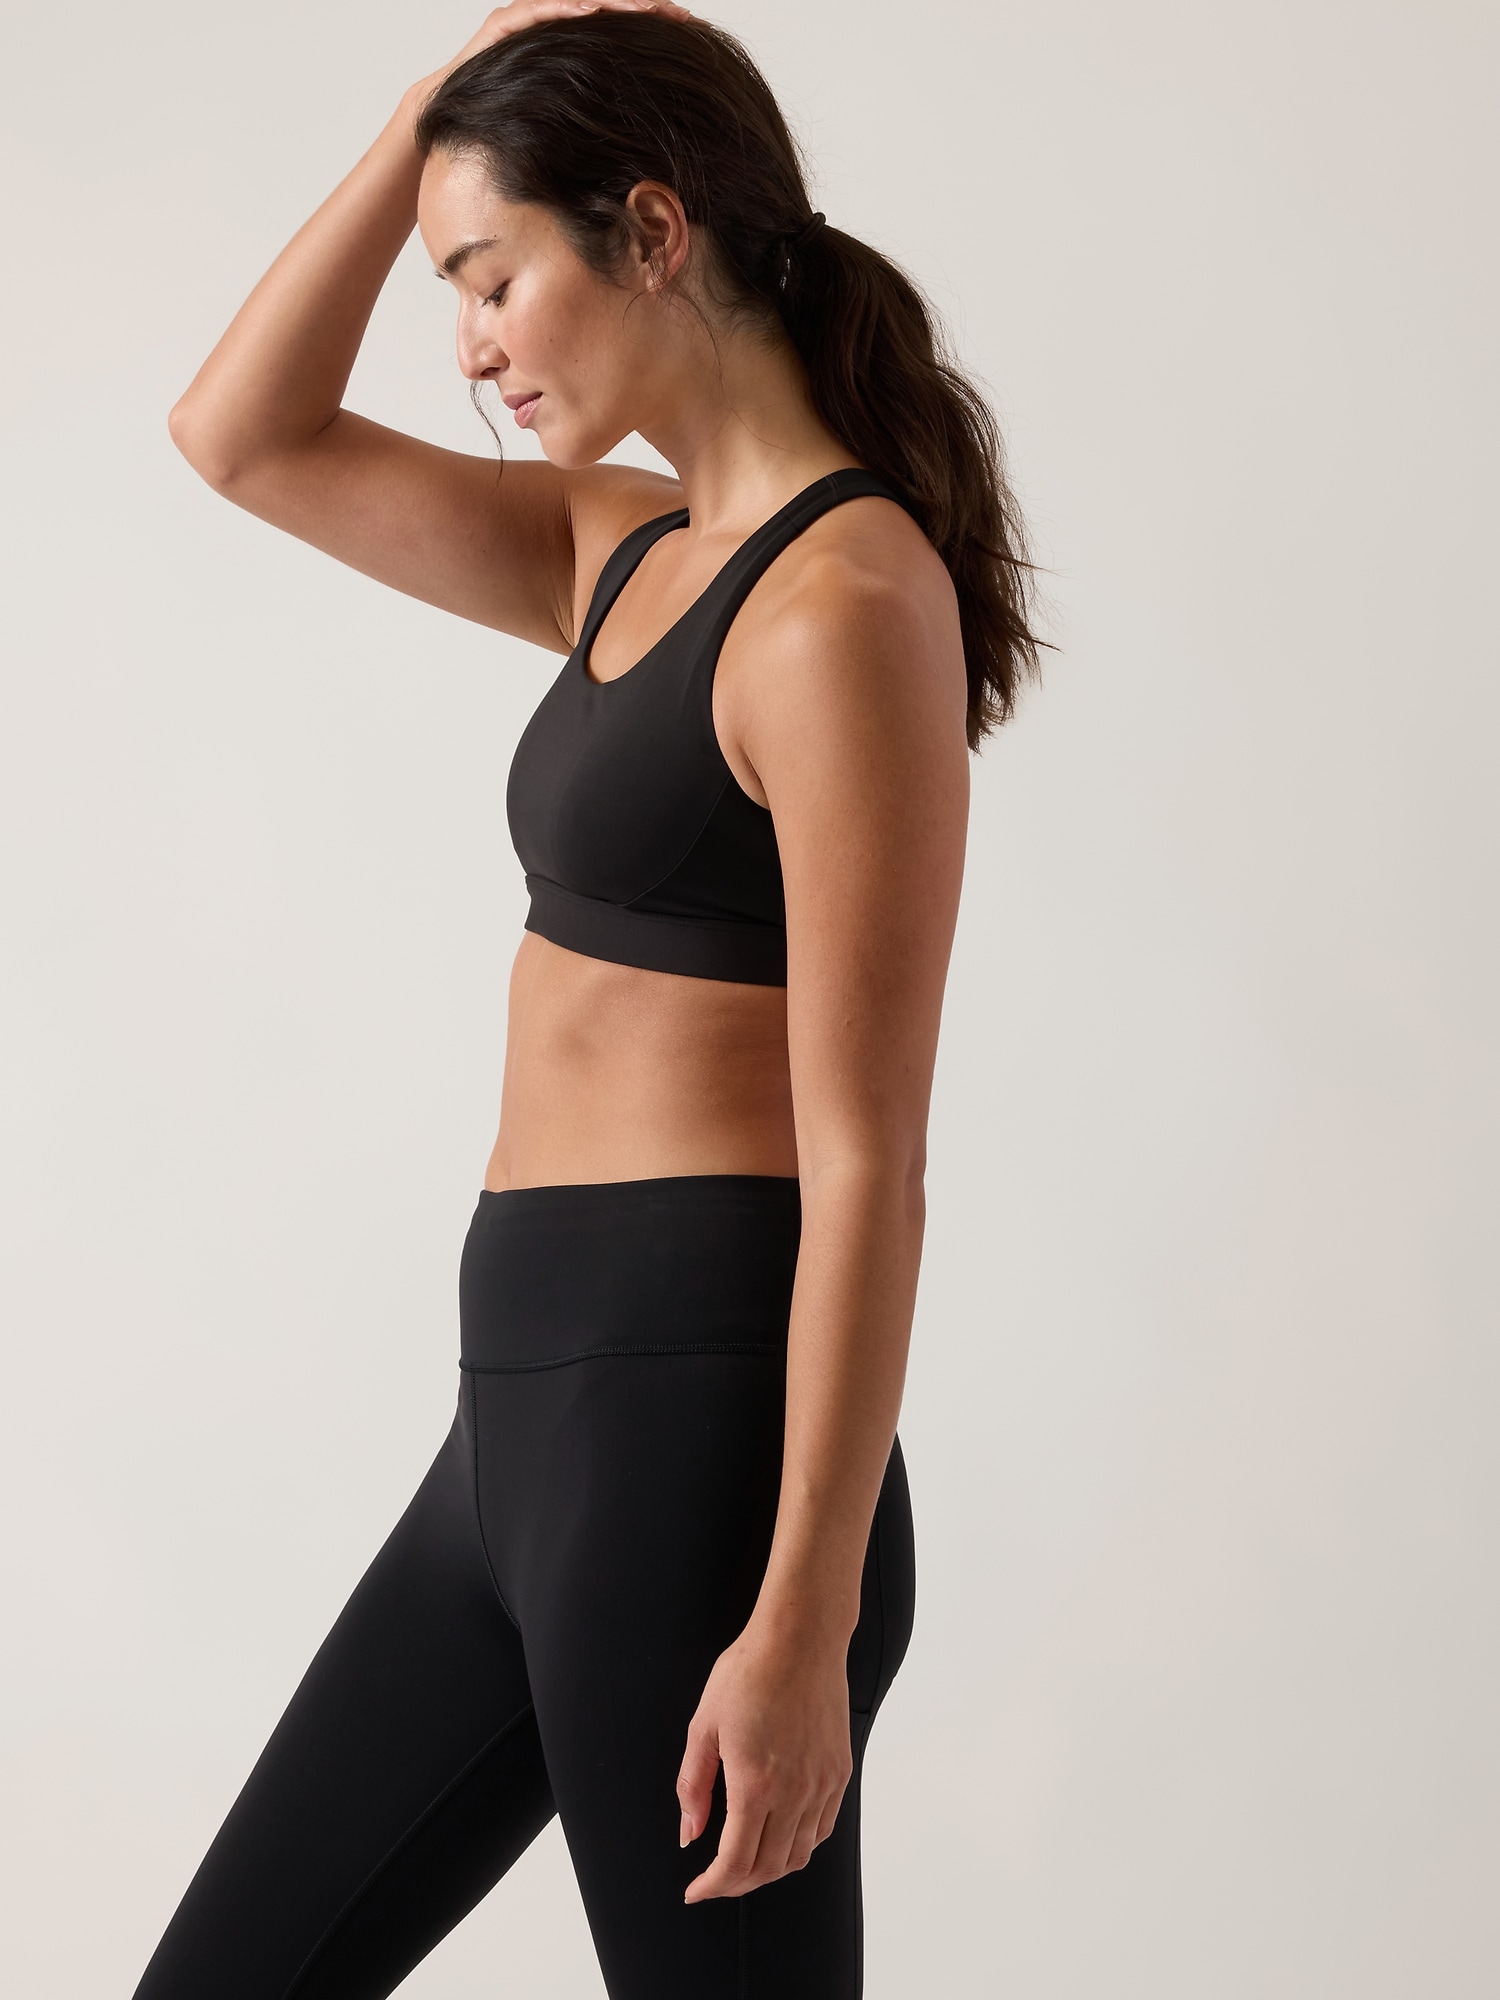 10 most popular things to buy at Athleta: Leggings, sports bras, and more